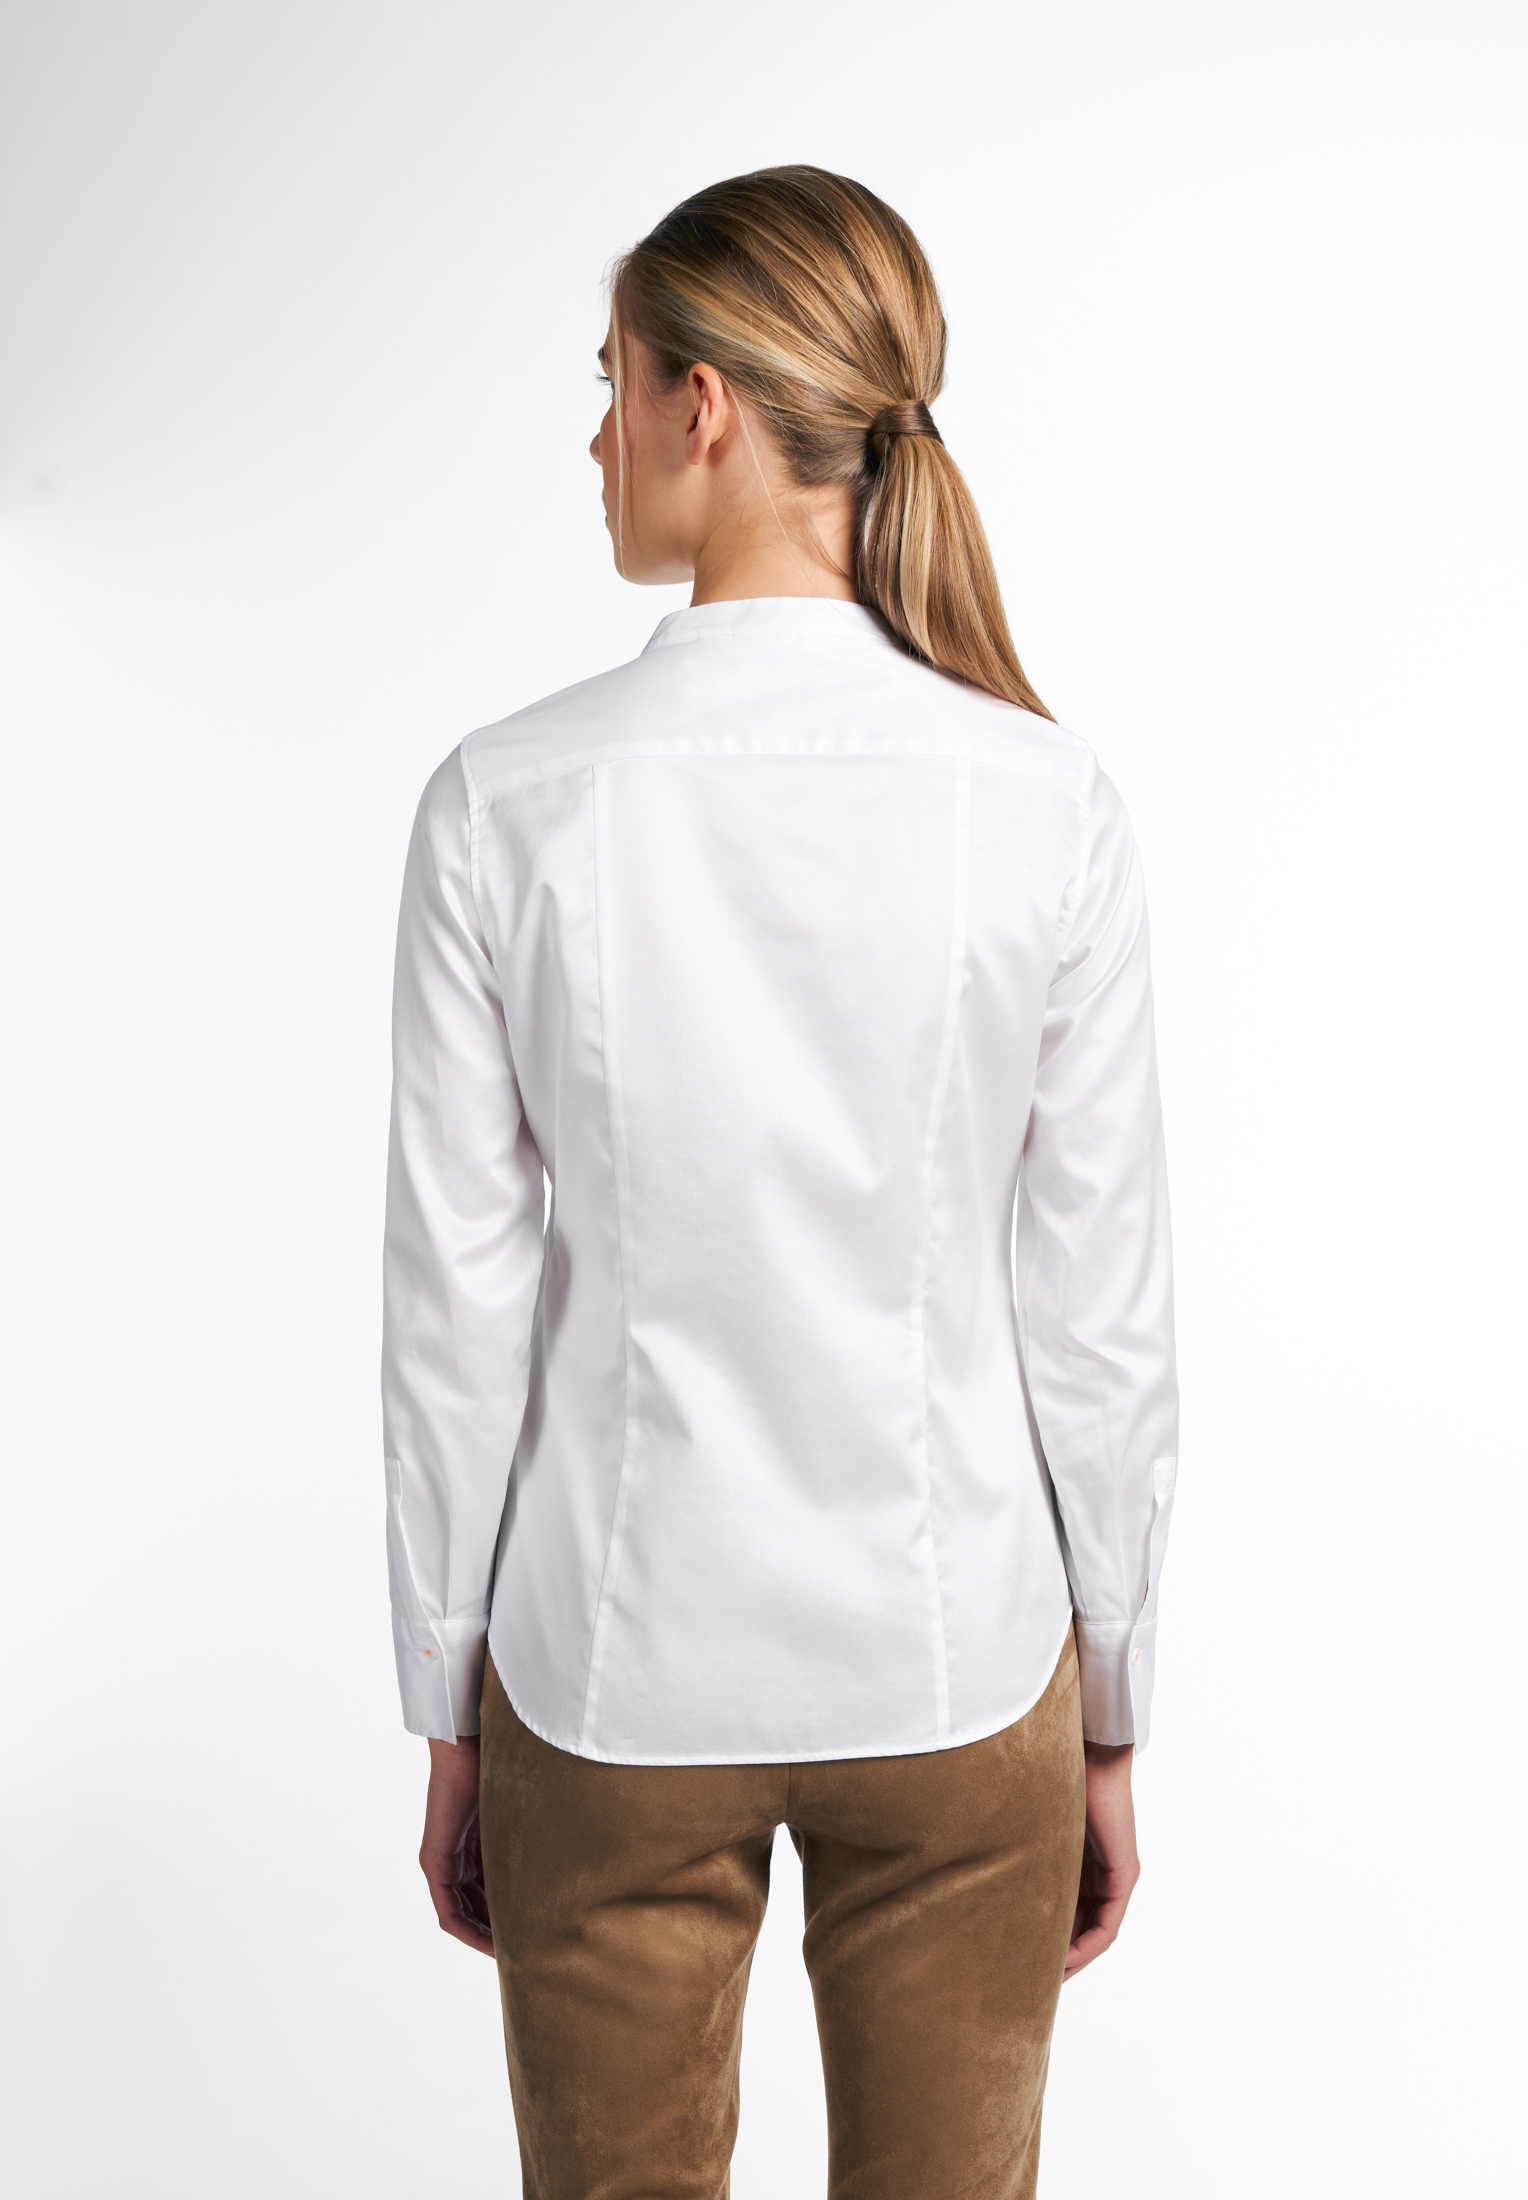 Soft Luxury Shirt Bluse off-white 38 | unifarben | in 2BL03742-00-02-38-1/1 | Langarm | off-white